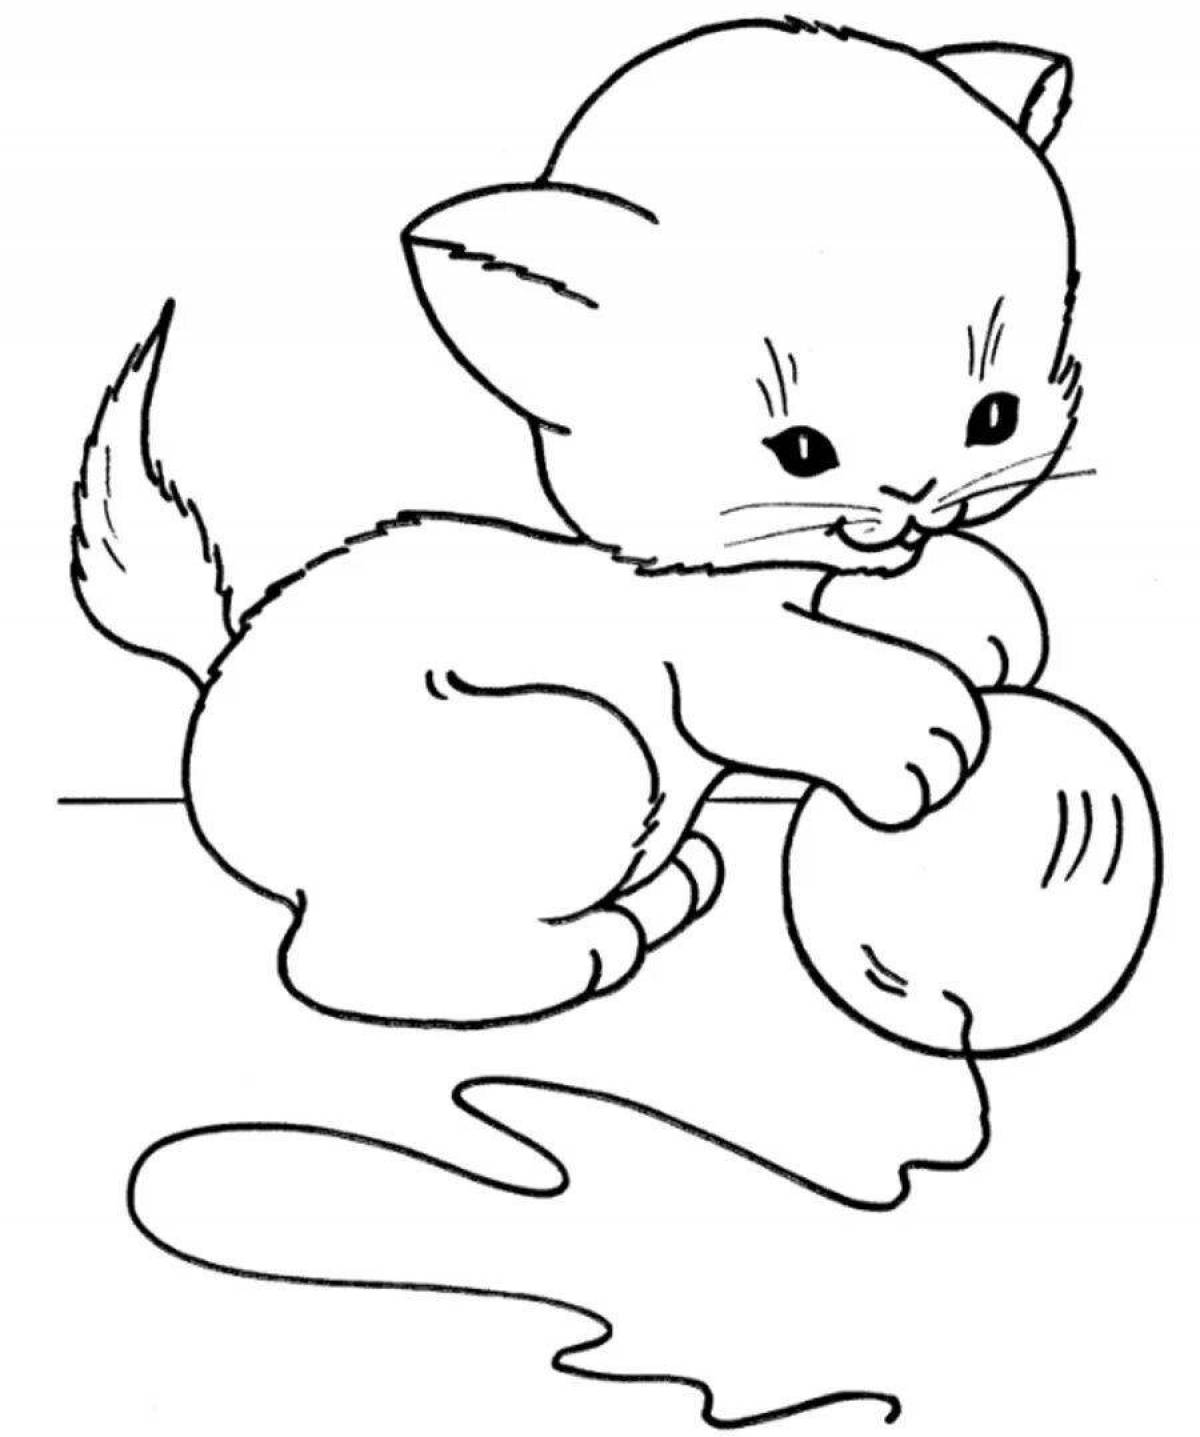 Coloring cat for children 2-3 years old